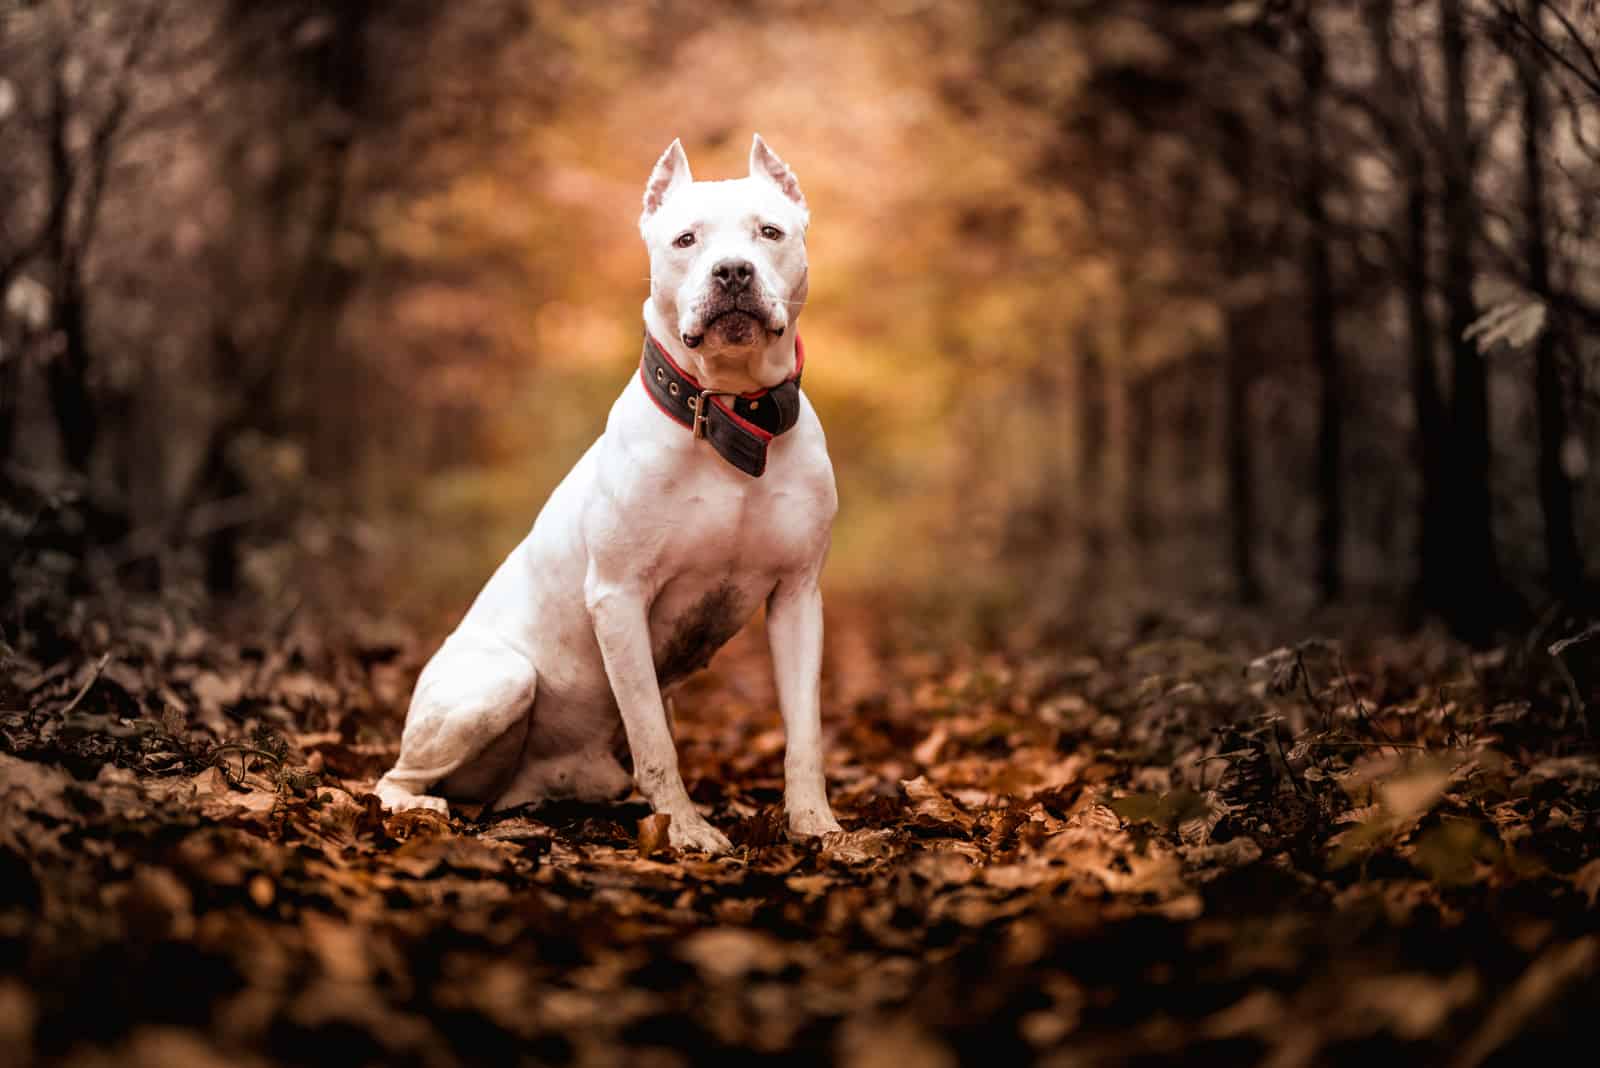 Best Pitbull Breeders In The US: Where To Find Pitbull Puppies For Sale